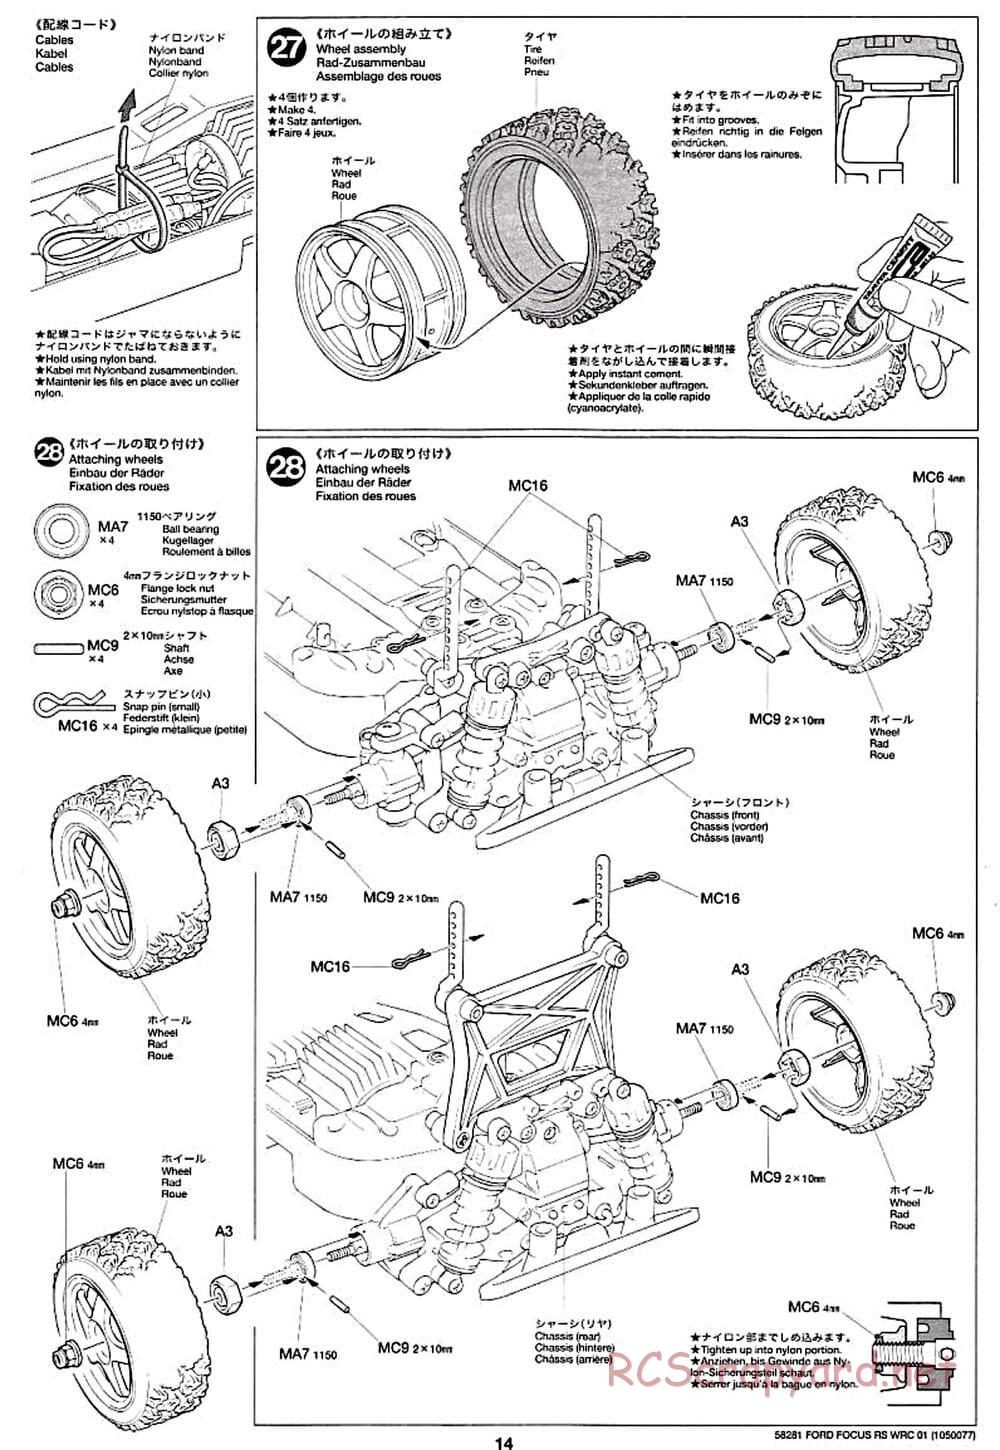 Tamiya - Ford Focus RS WRC 01 - TB-01 Chassis - Manual - Page 14